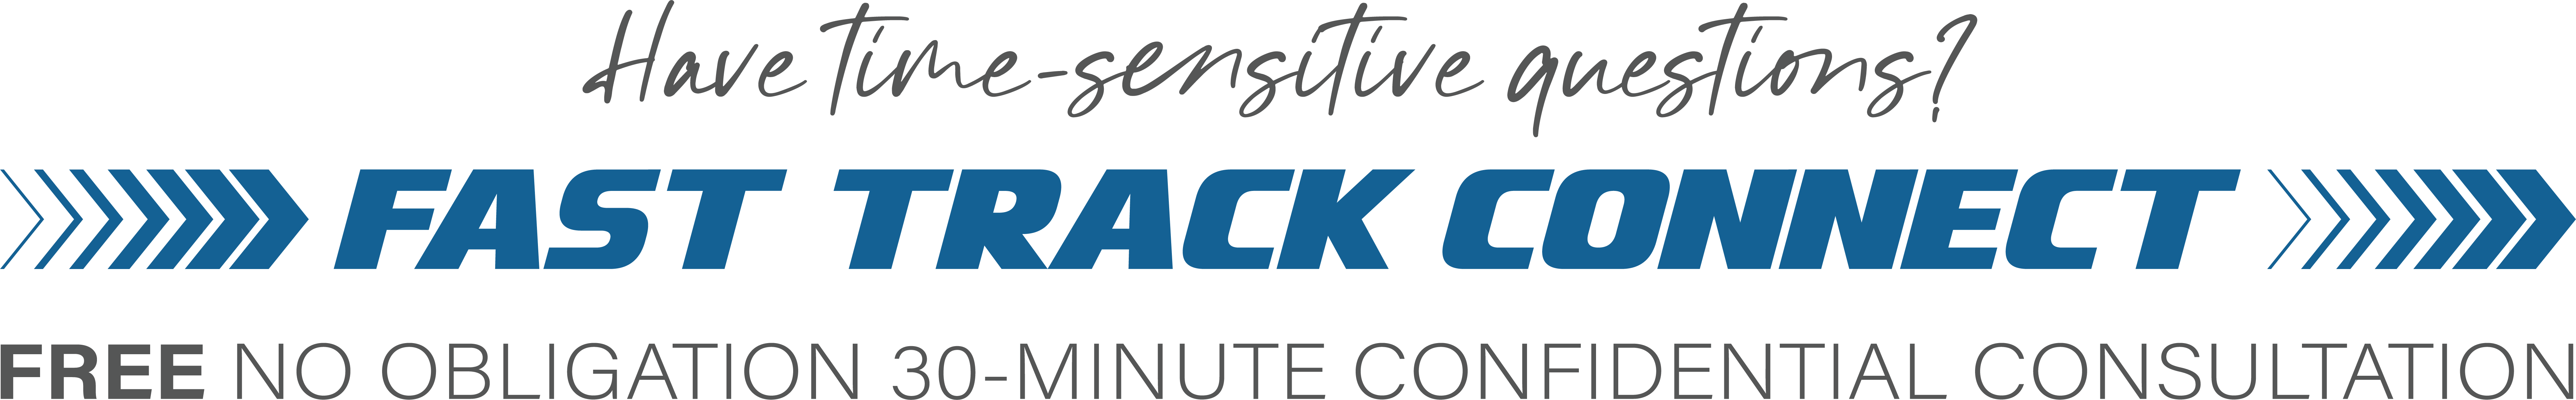 Fast Track Connect